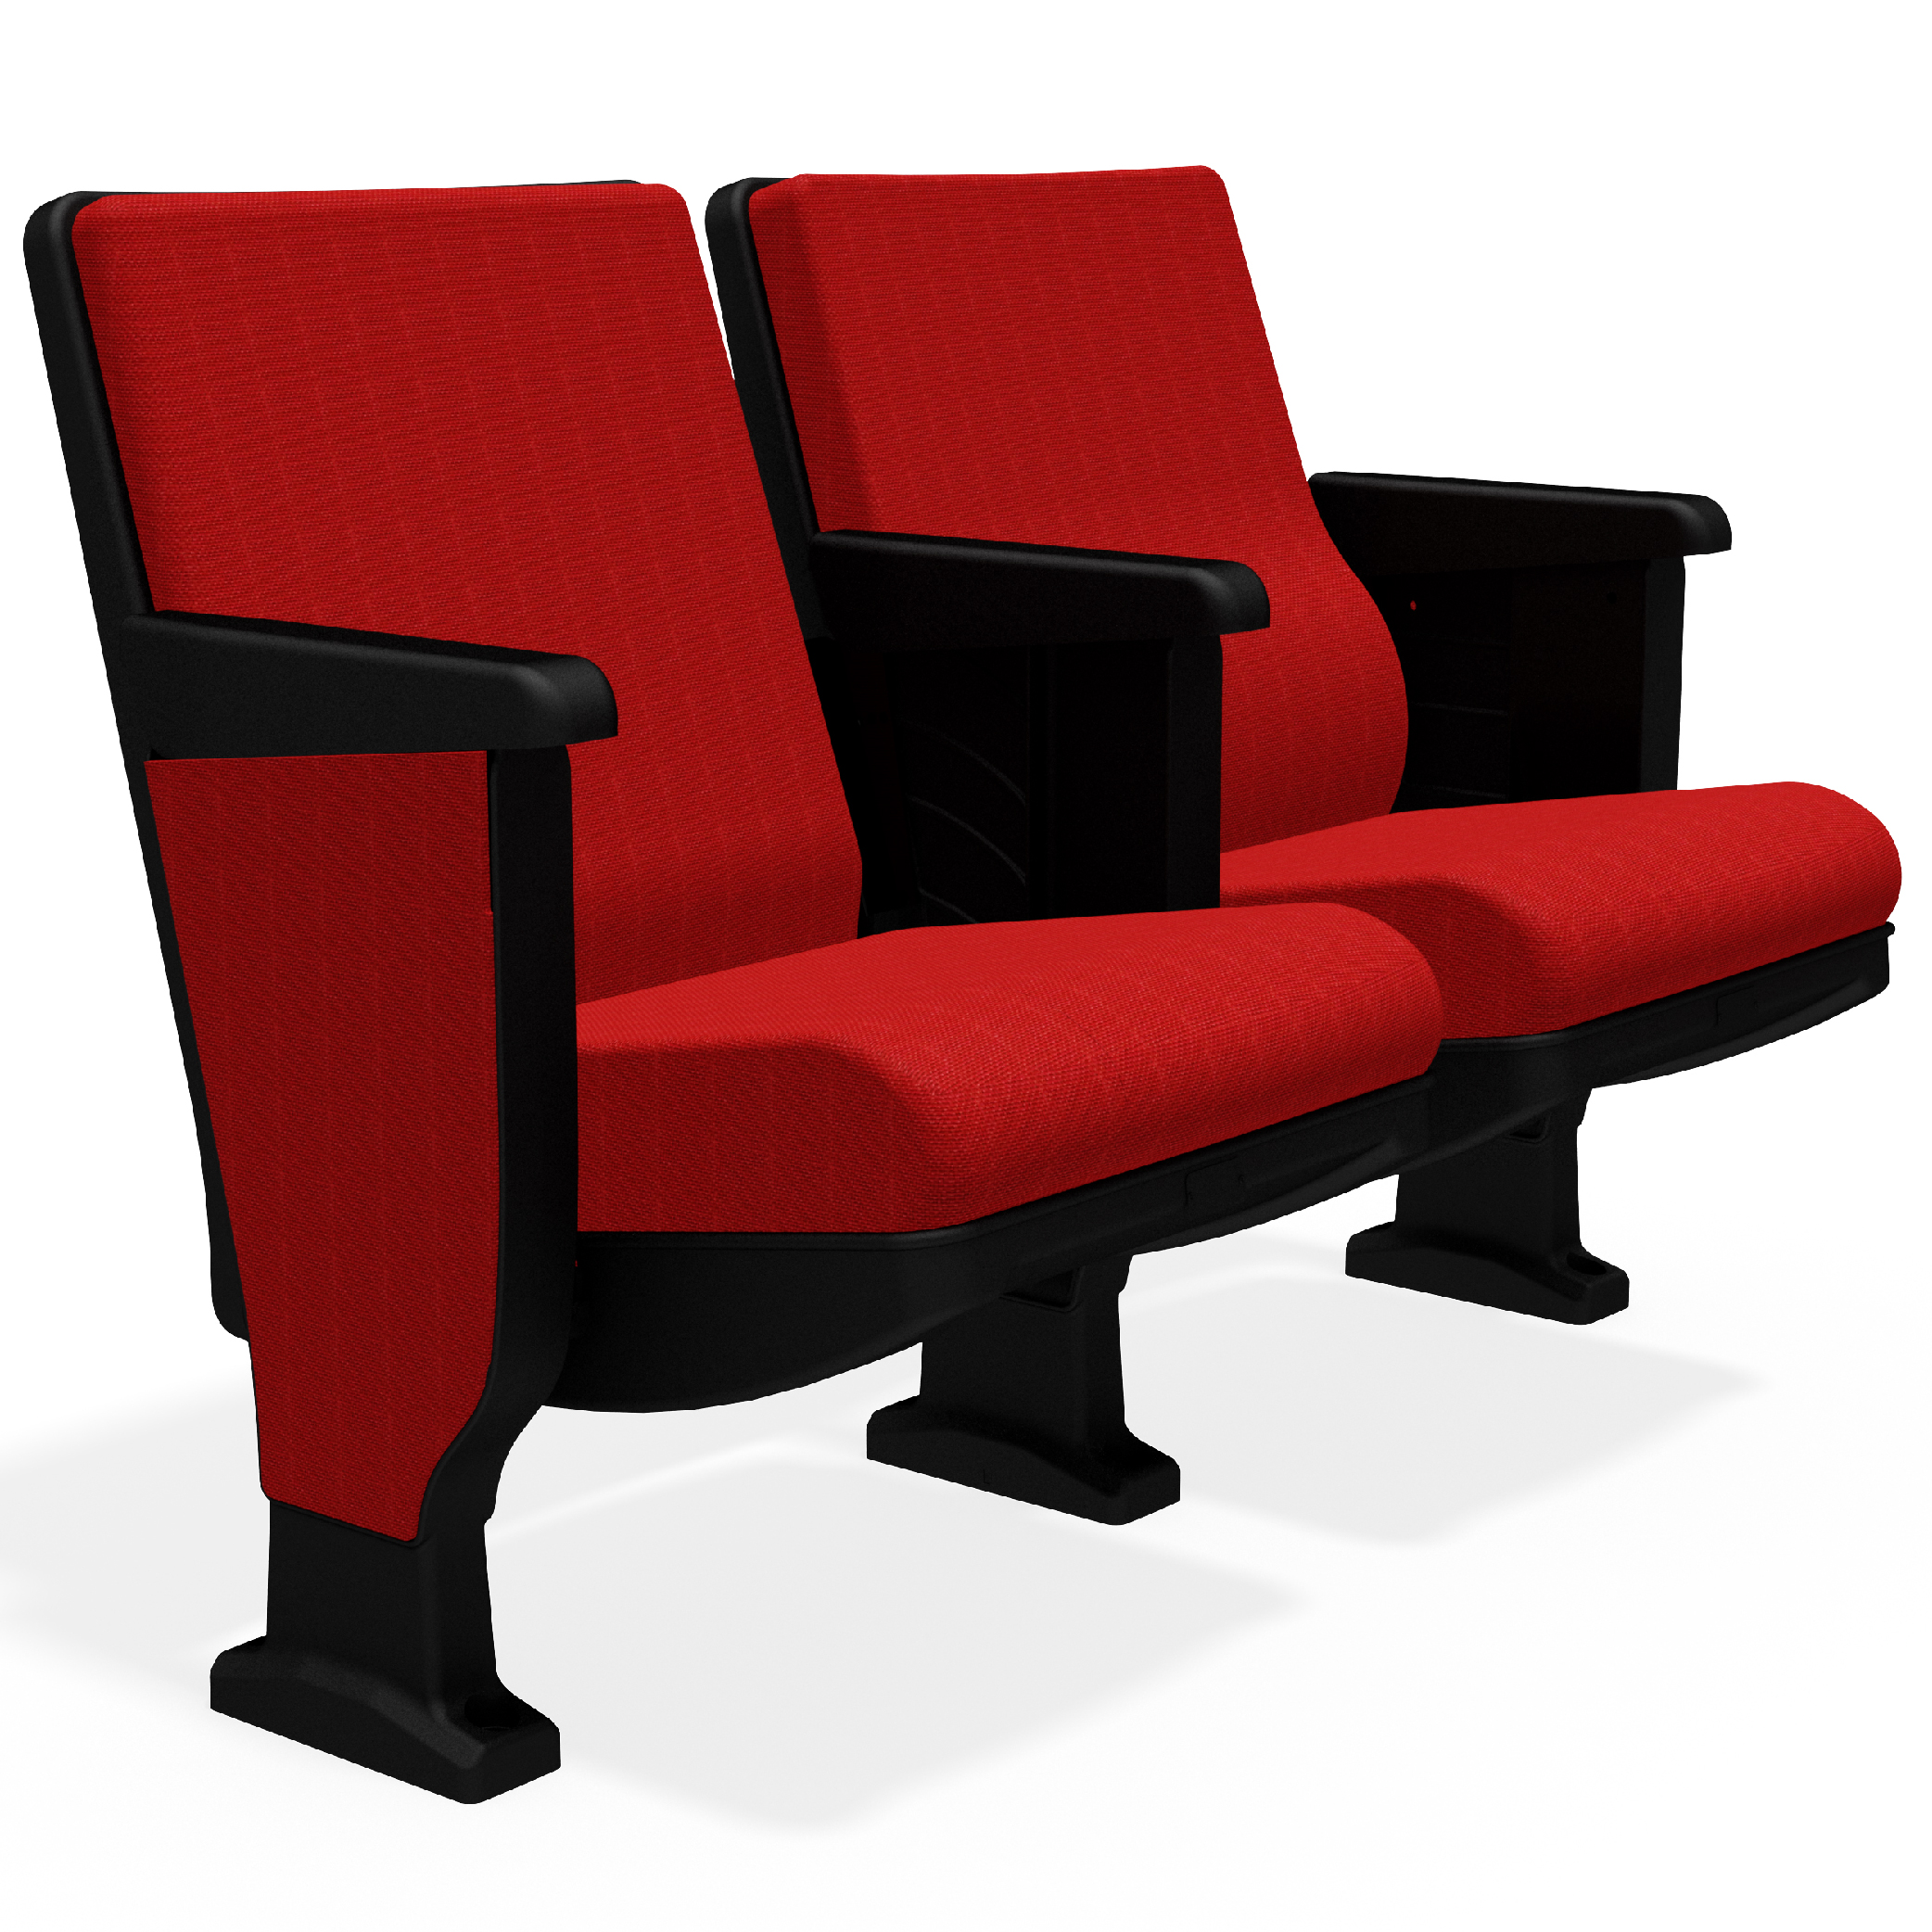 Our Convention H2 Model Theater seat for churches and synagogues from Woods Church Interiors